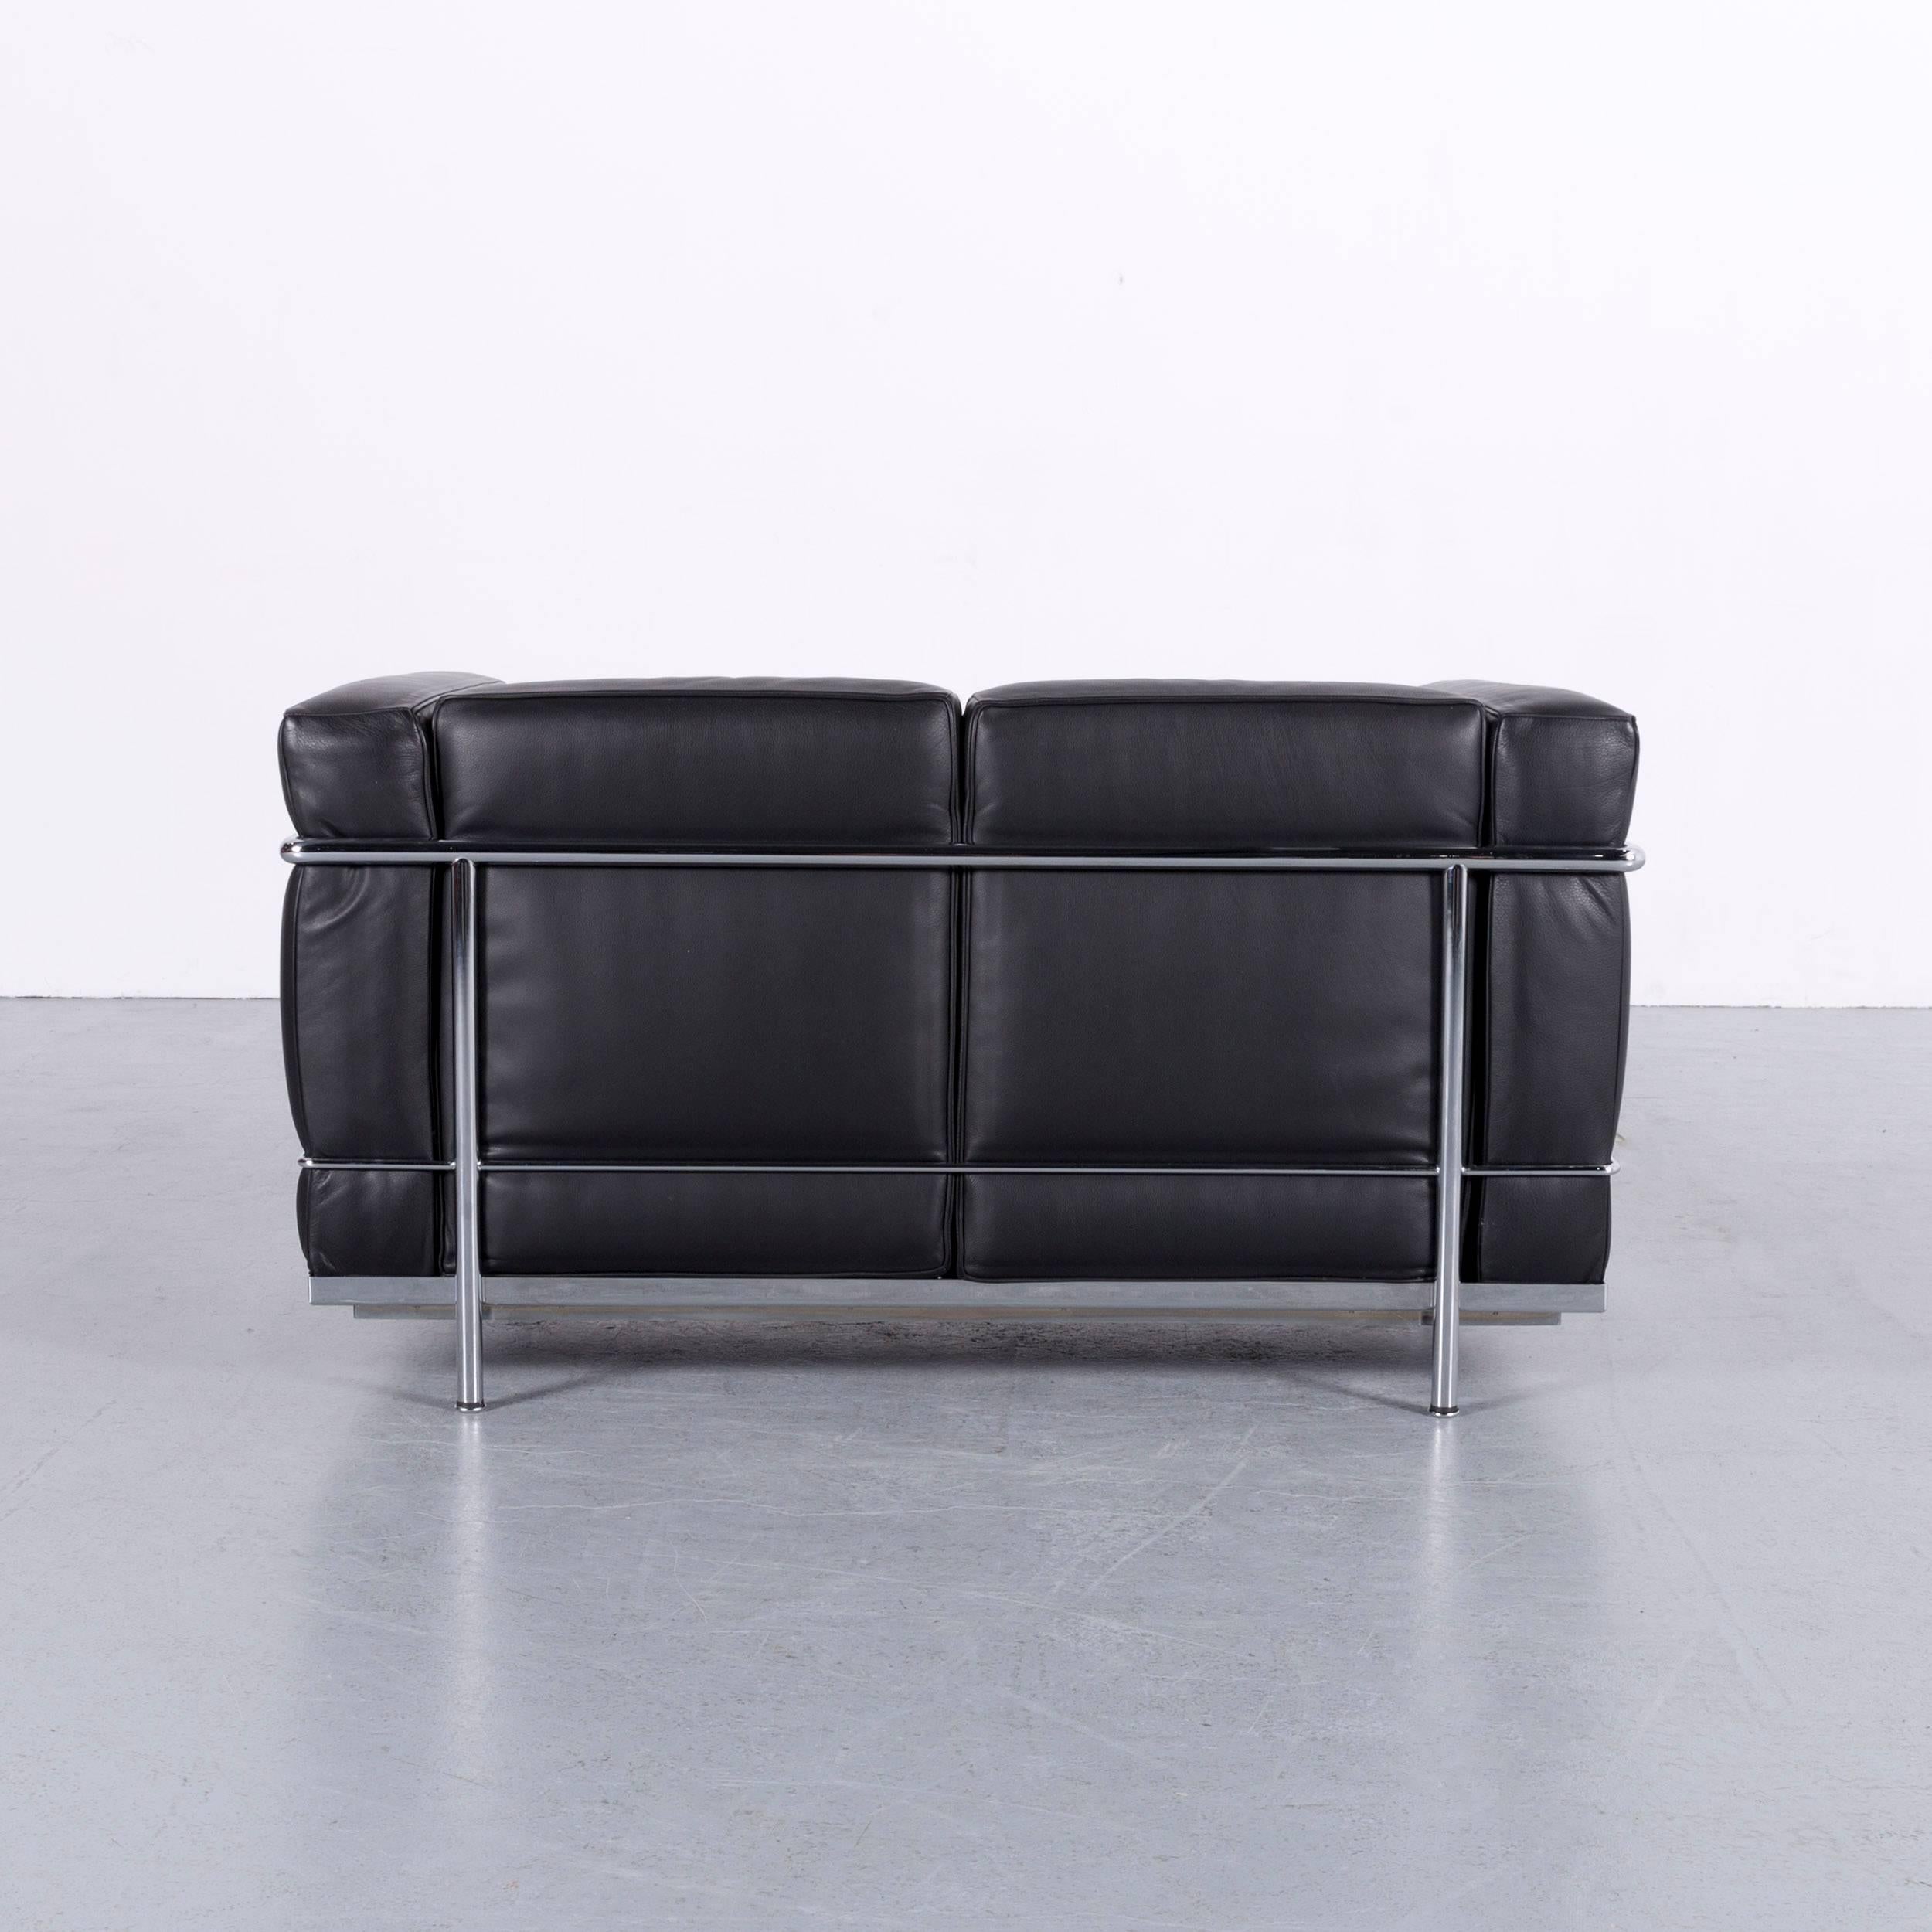 Cassina Le Corbusier LC 2 Leather Sofa Black Two-Seat For Sale 2